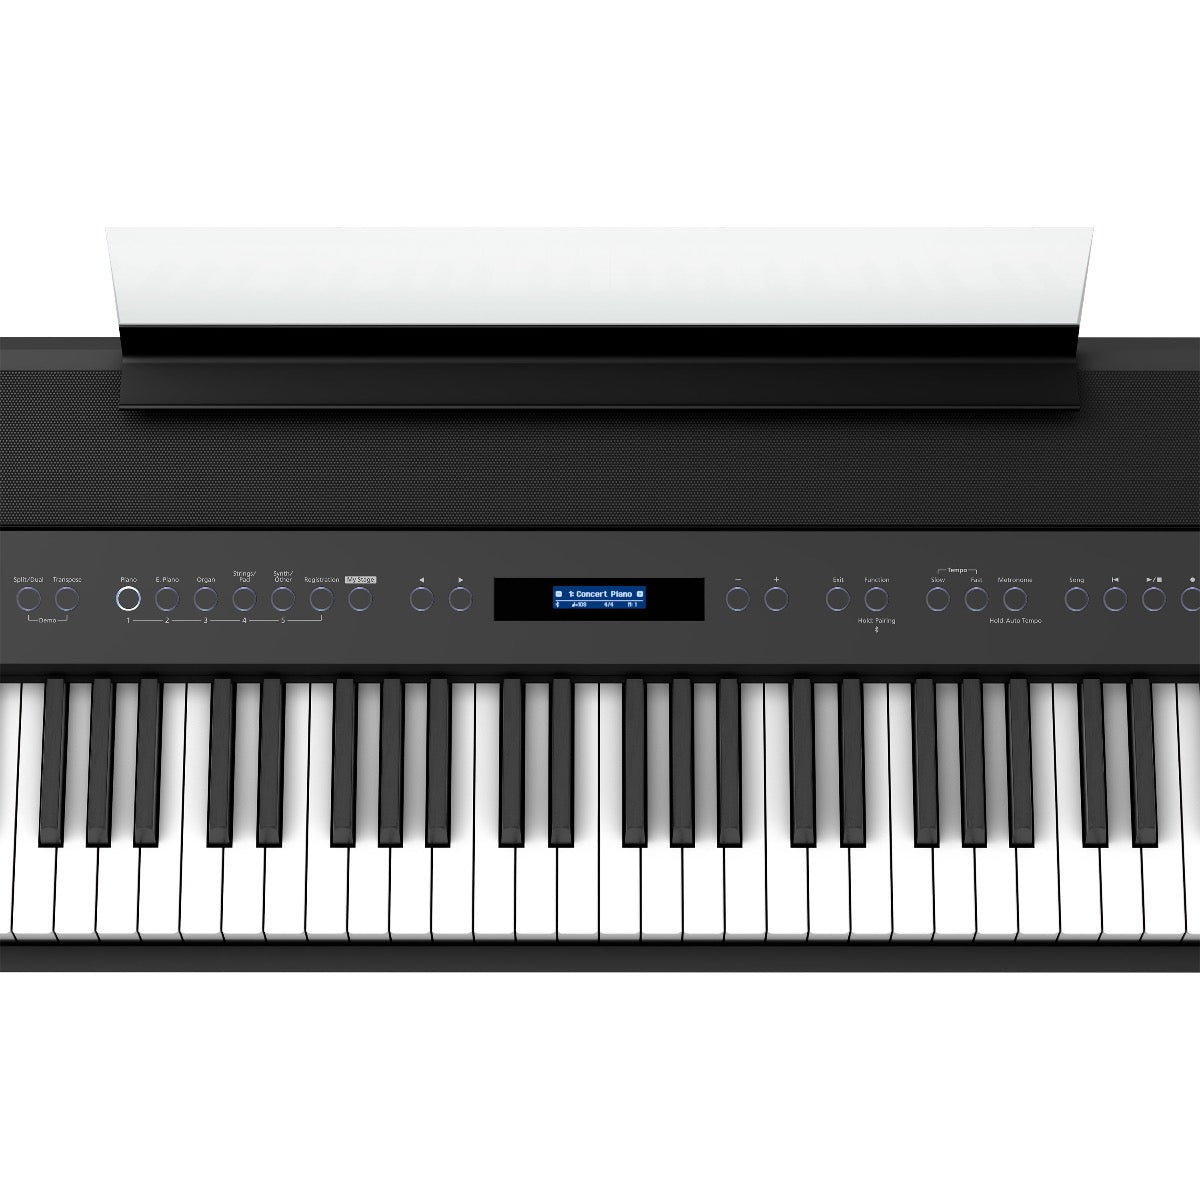 Close-up top view of Roland FP-90X Digital Piano - Black showing control panel and portion of keyboard